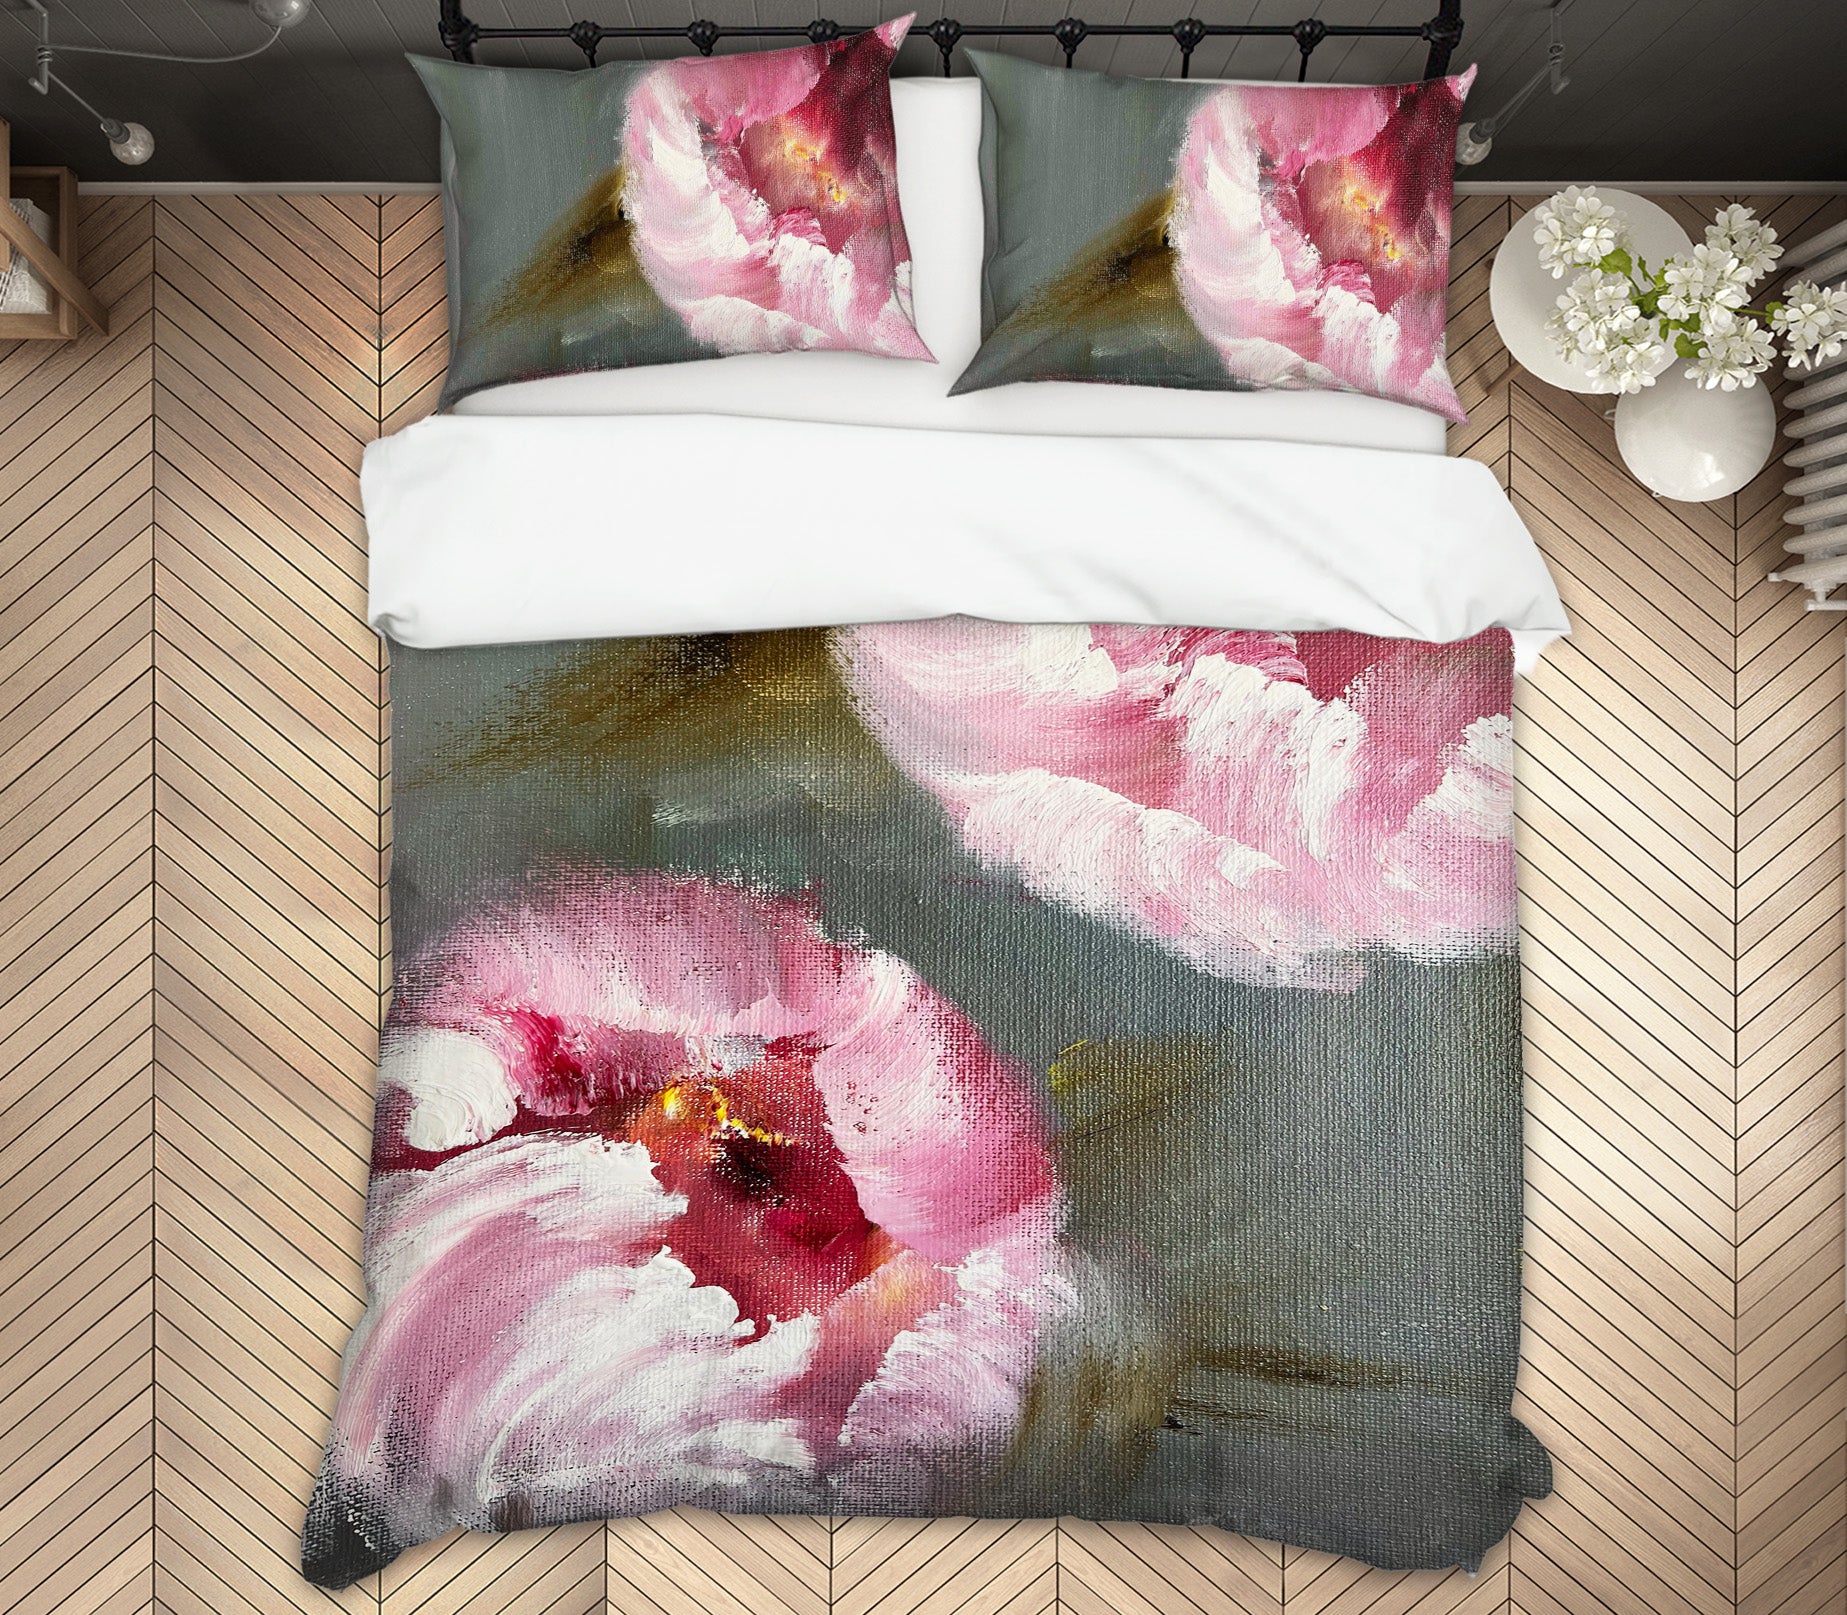 3D Painted Flowers 574 Skromova Marina Bedding Bed Pillowcases Quilt